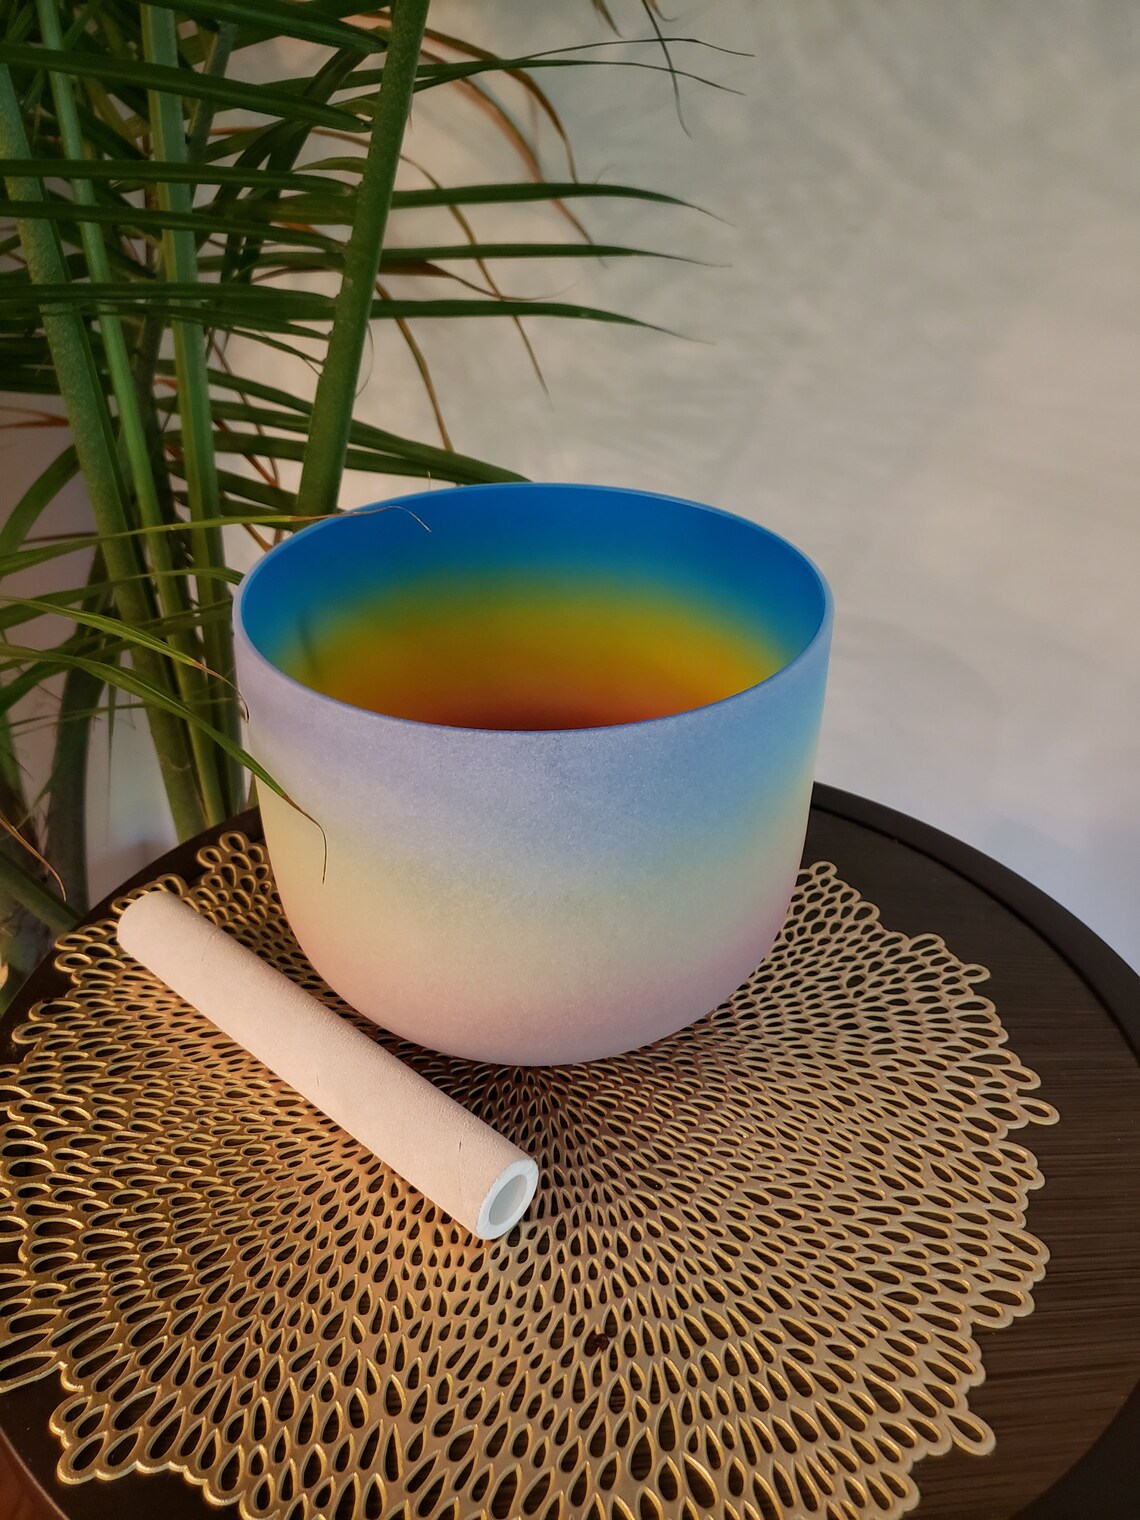 432Hz G Note 7 Inch 4th Octave Rainbow Throat Chakra Crystal Singing Bowl with Striker O-ring, Sound Healing, Meditation